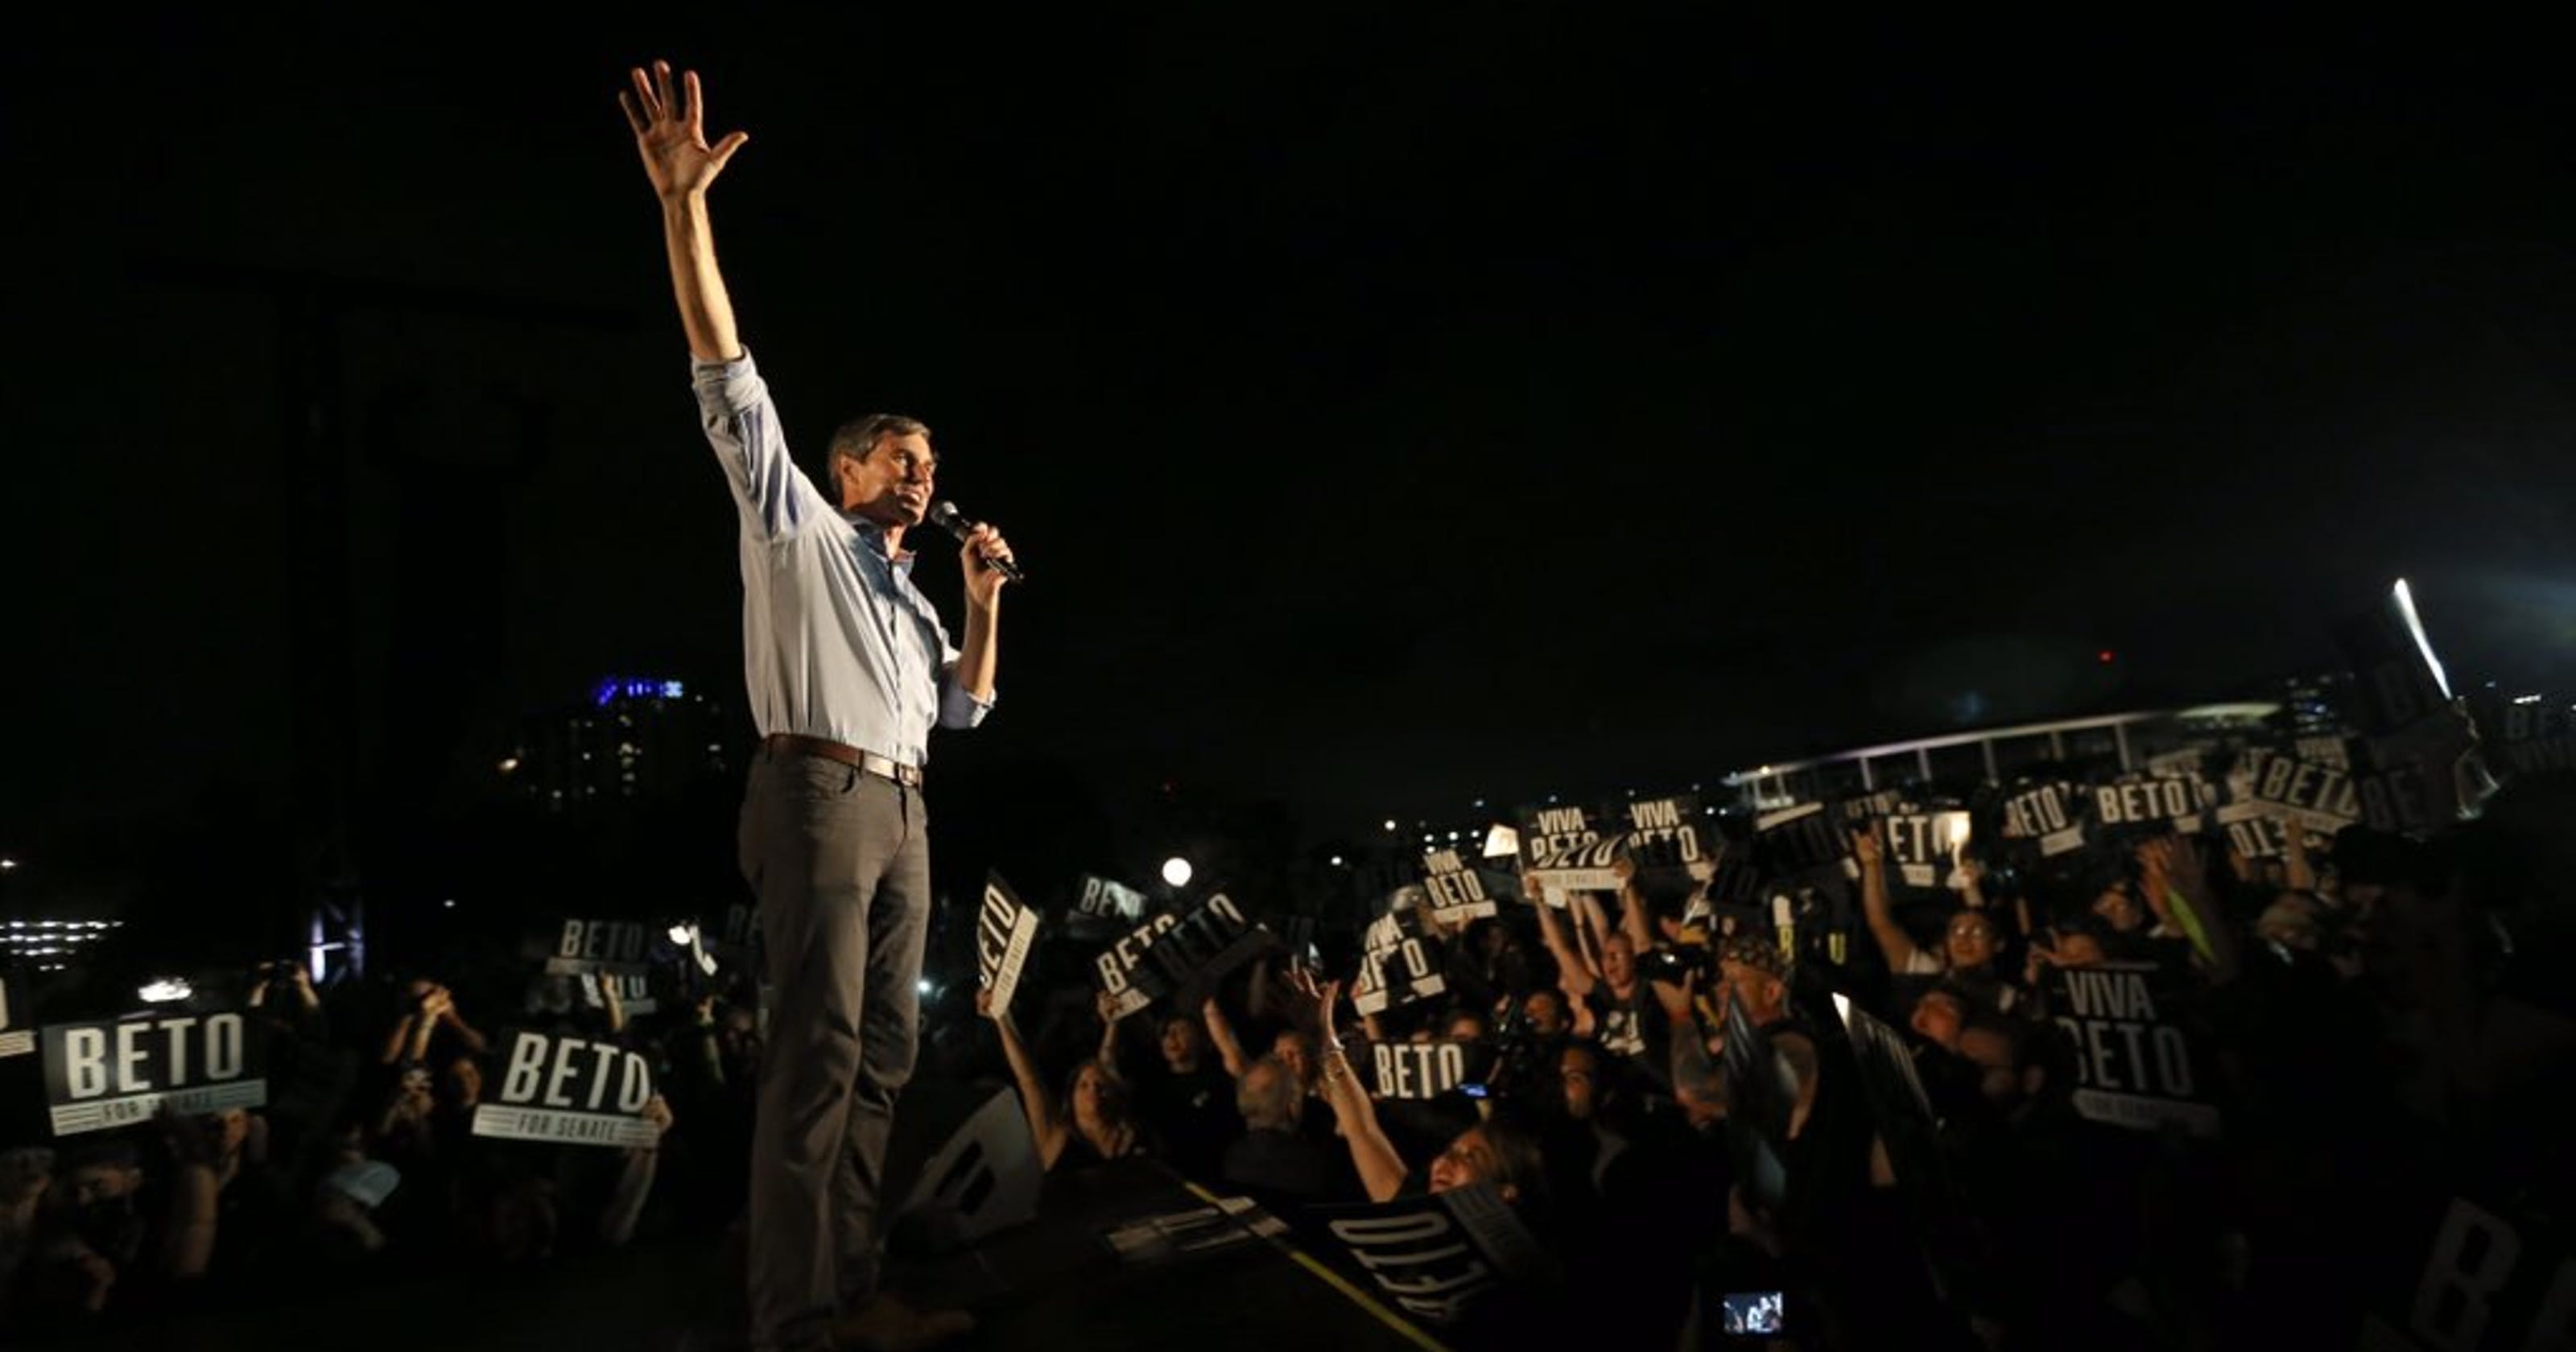 Beto Willie Nelson Fans Pack Turn Out For Texas Rally In Austin - 